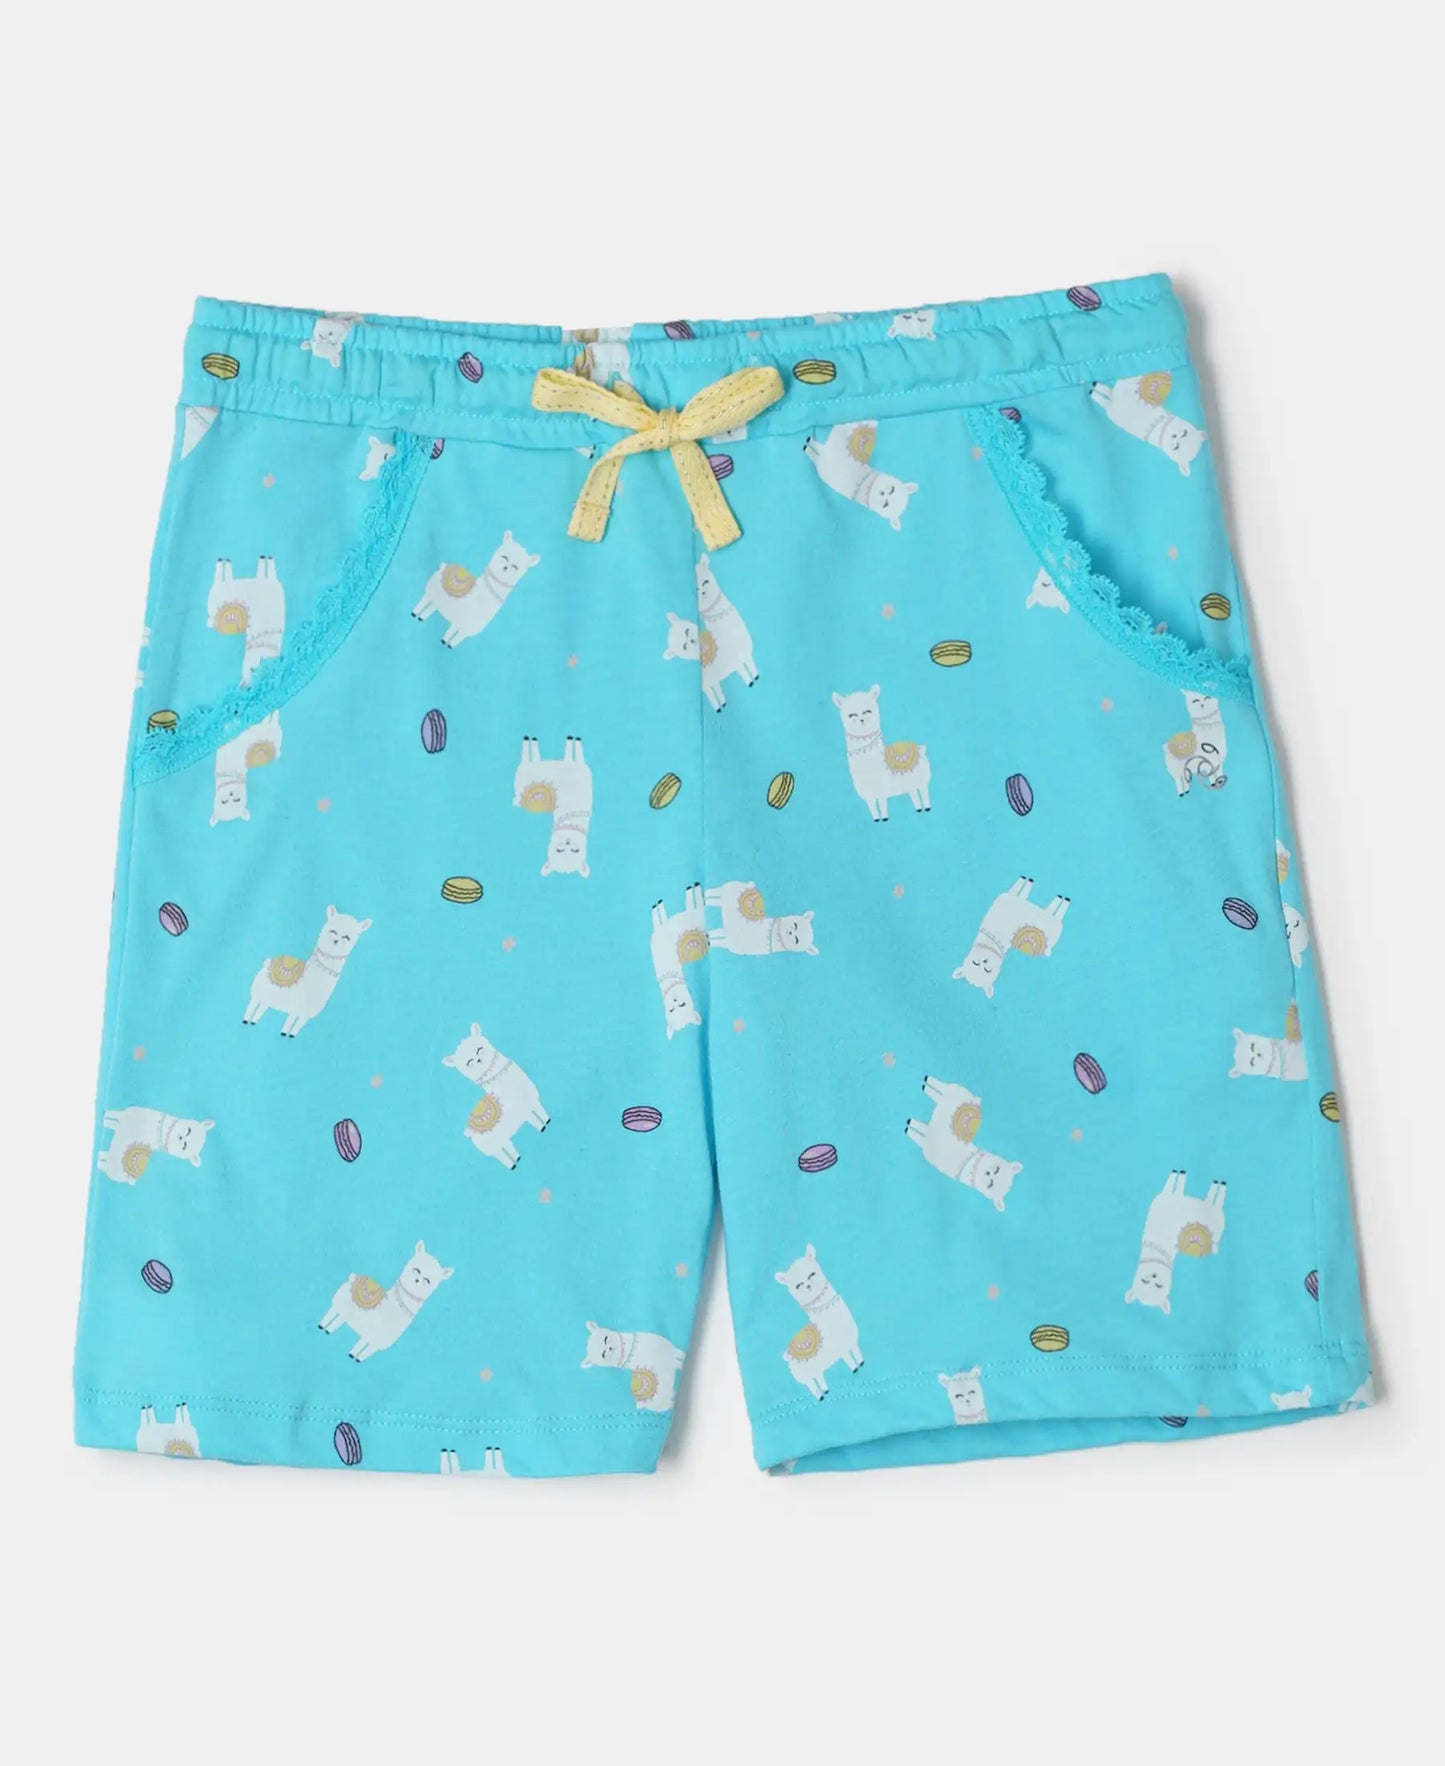 Super Combed Cotton Printed Shorts - Blue Curacao Printed-1